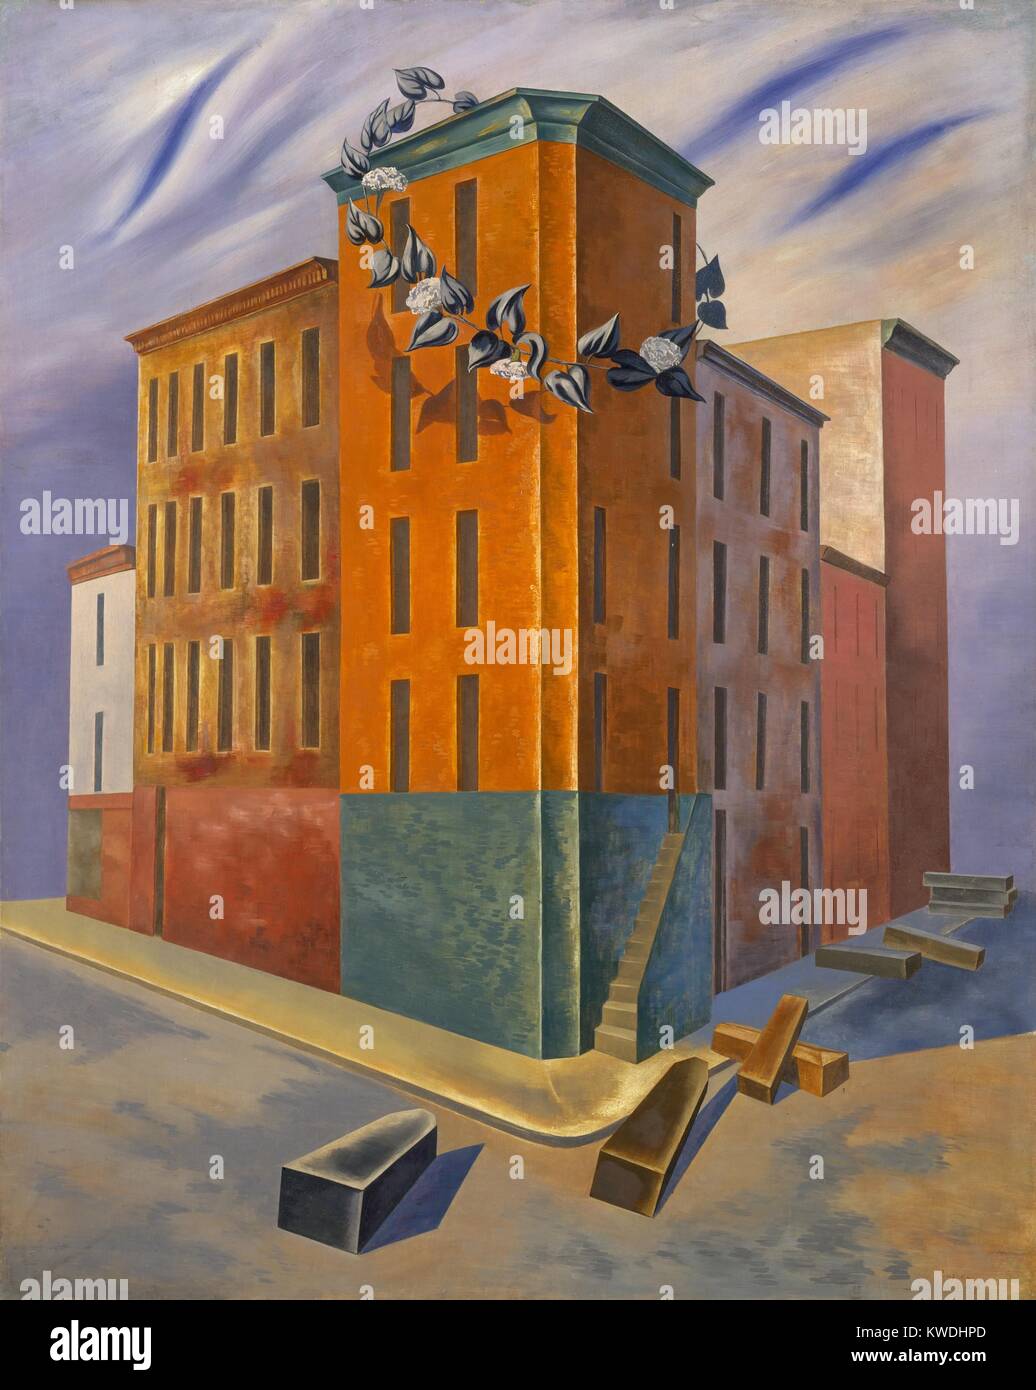 ONE THIRD OF A NATION, by O. Louis Guglielmi, 1939, American painting, oil and tempera on wood. The title references Franklin Roosevelts 1937 inaugural address, I see one-third of a nation ill-housed, ill-clad, ill-nourished. With surrealist elements, it depicts poverty with coffin-like forms and a floral mourning wreath on the building (BSLOC 2017 7 119) Stock Photo